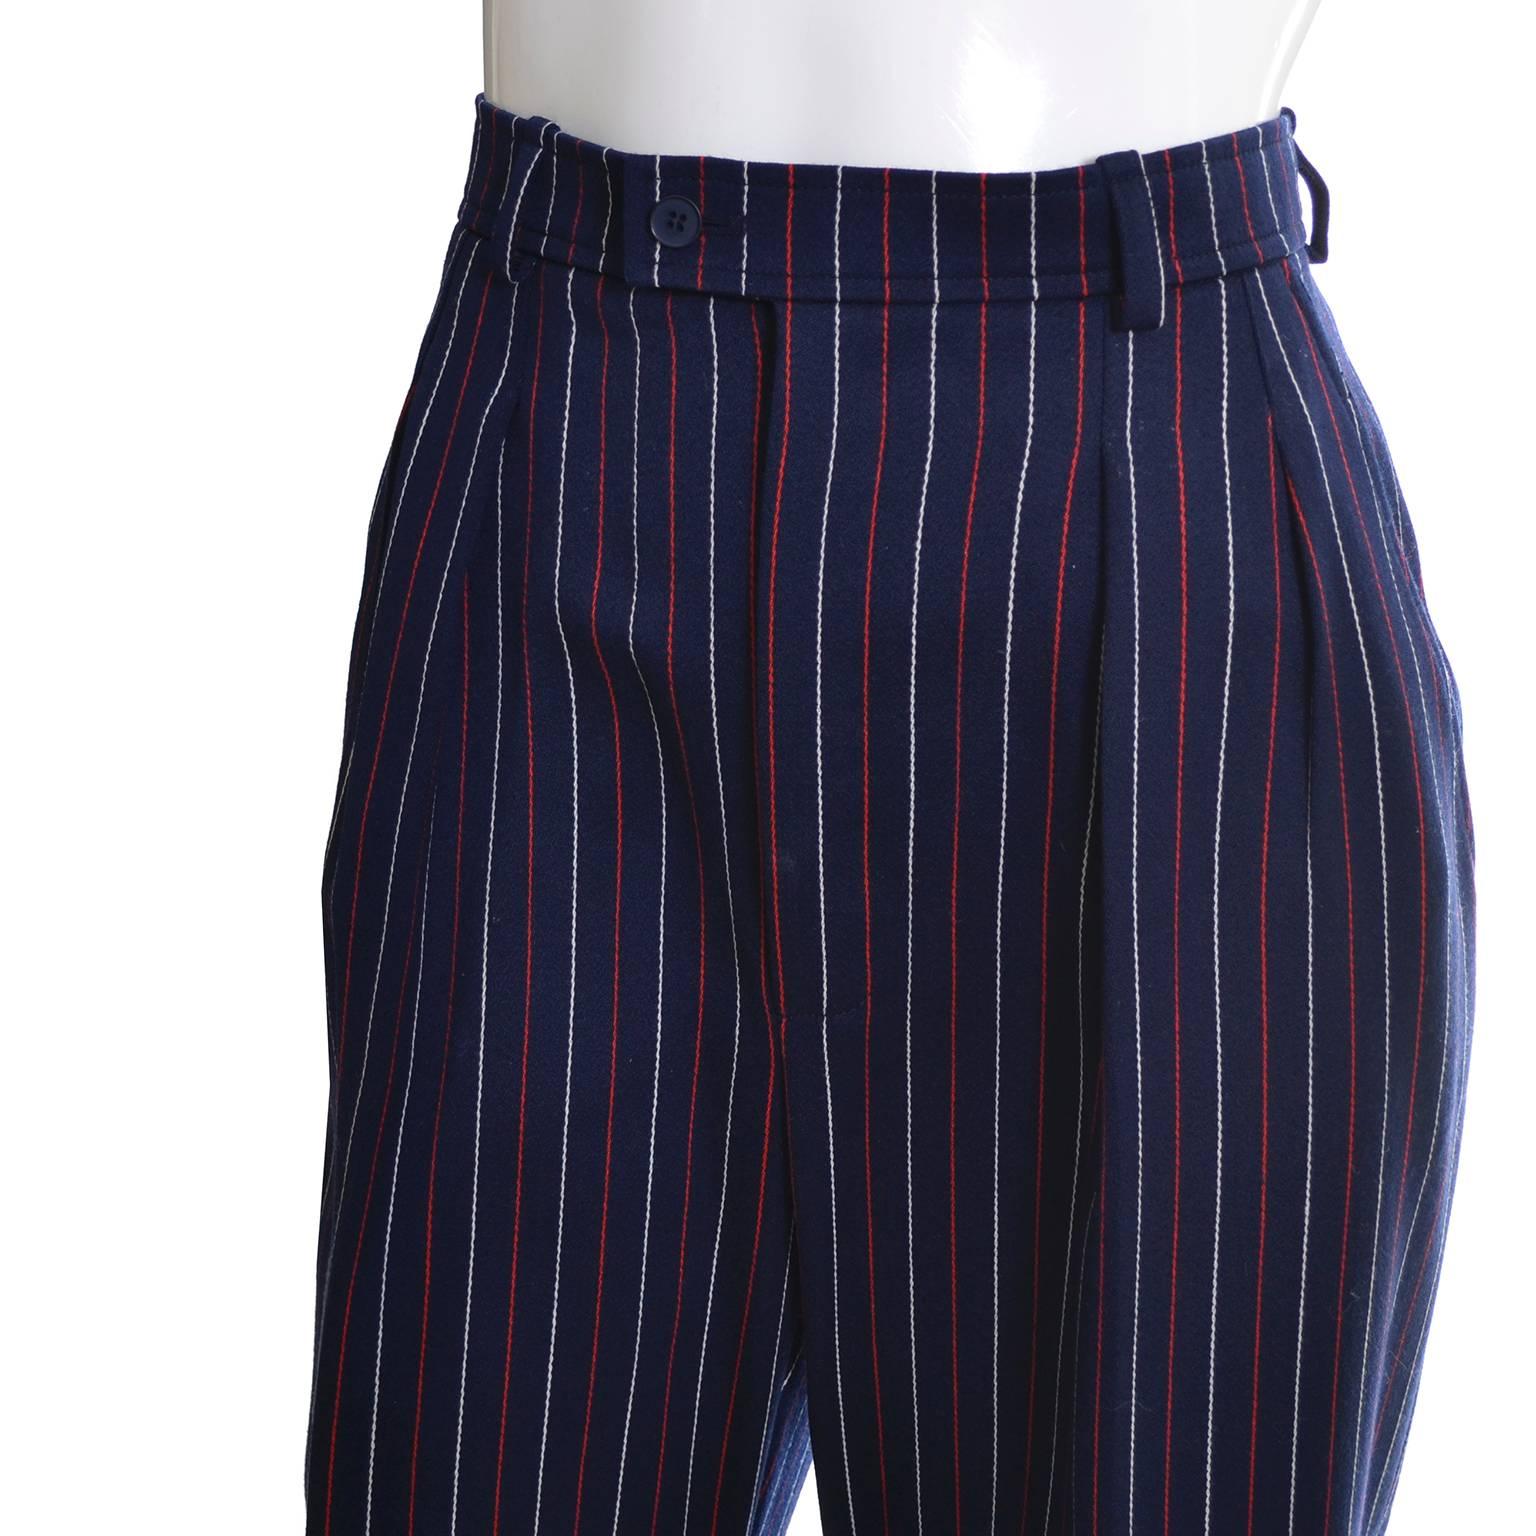 These vintage YSL lightweight fine wool pinstriped pants came from an incredible estate of designer vintage clothing.  The woman who owned these hardly, if ever, wore any of her clothing so most of it was in as new condition, including these pants! 